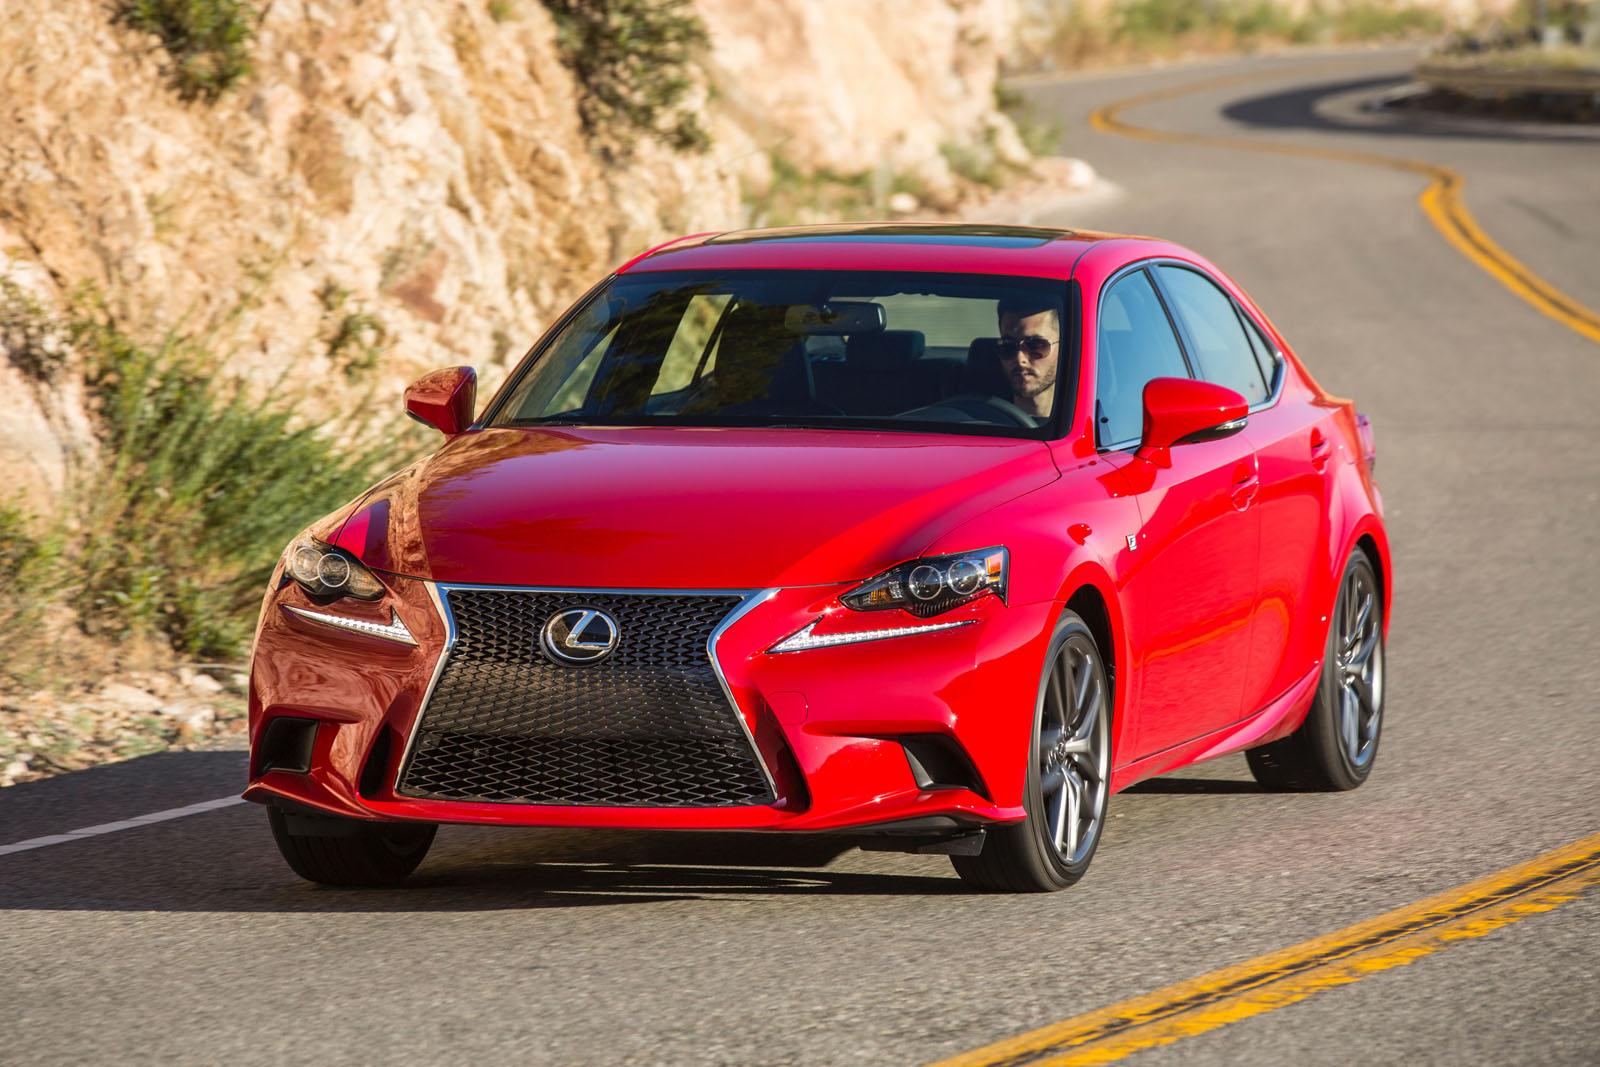 2016 Lexus IS Revealed Looking Exactly the Same but with Two New ...